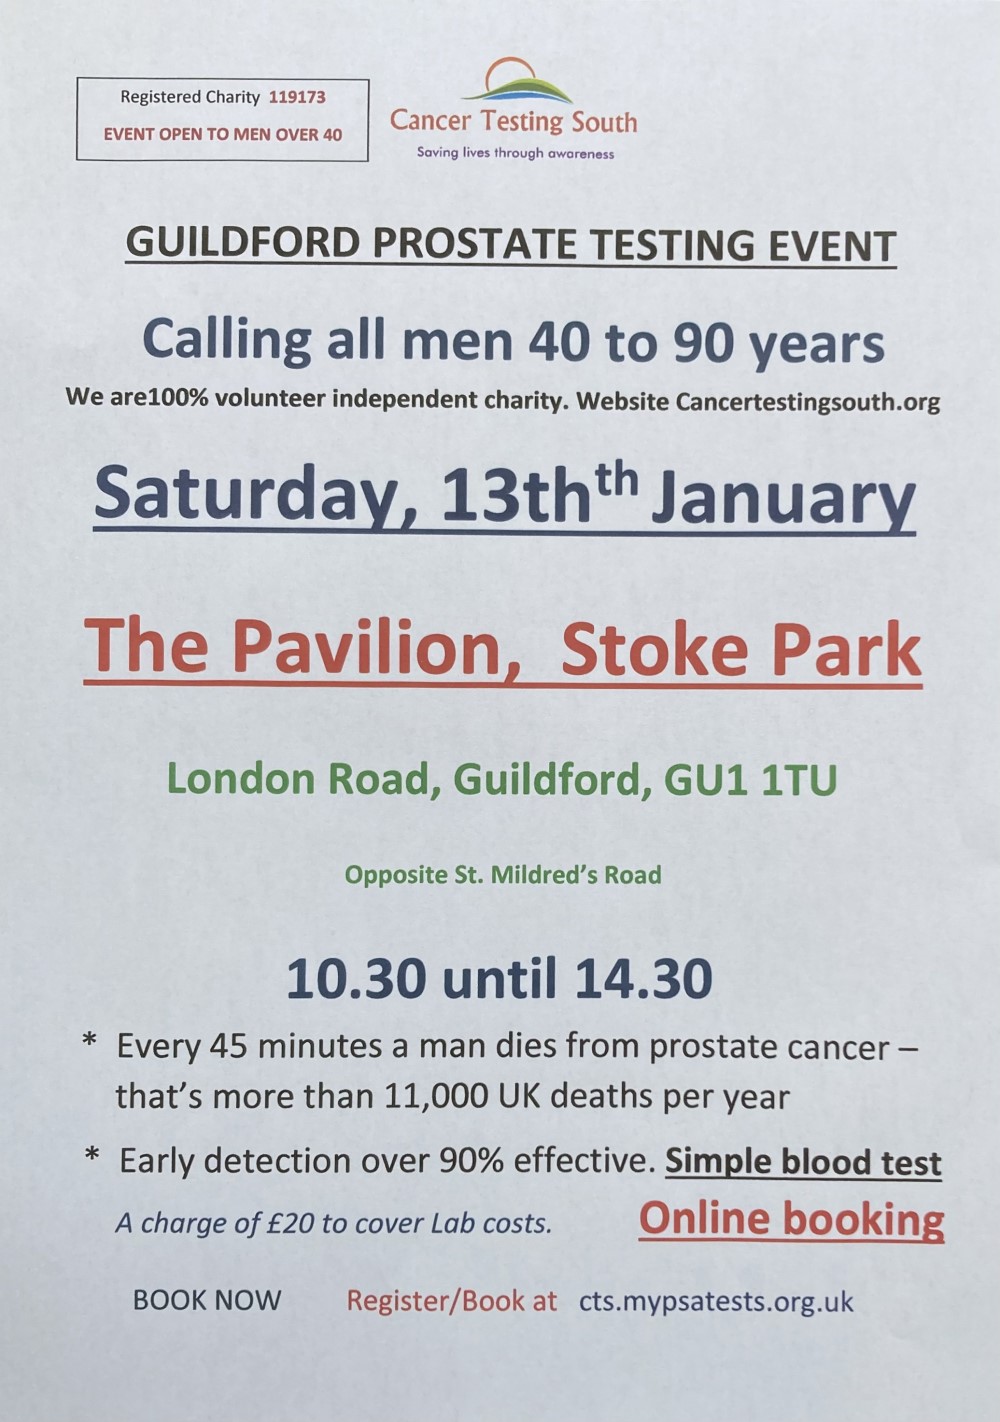 PSA Prostate Cancer blood testing event at our Club House on Saturday, 13th Jan